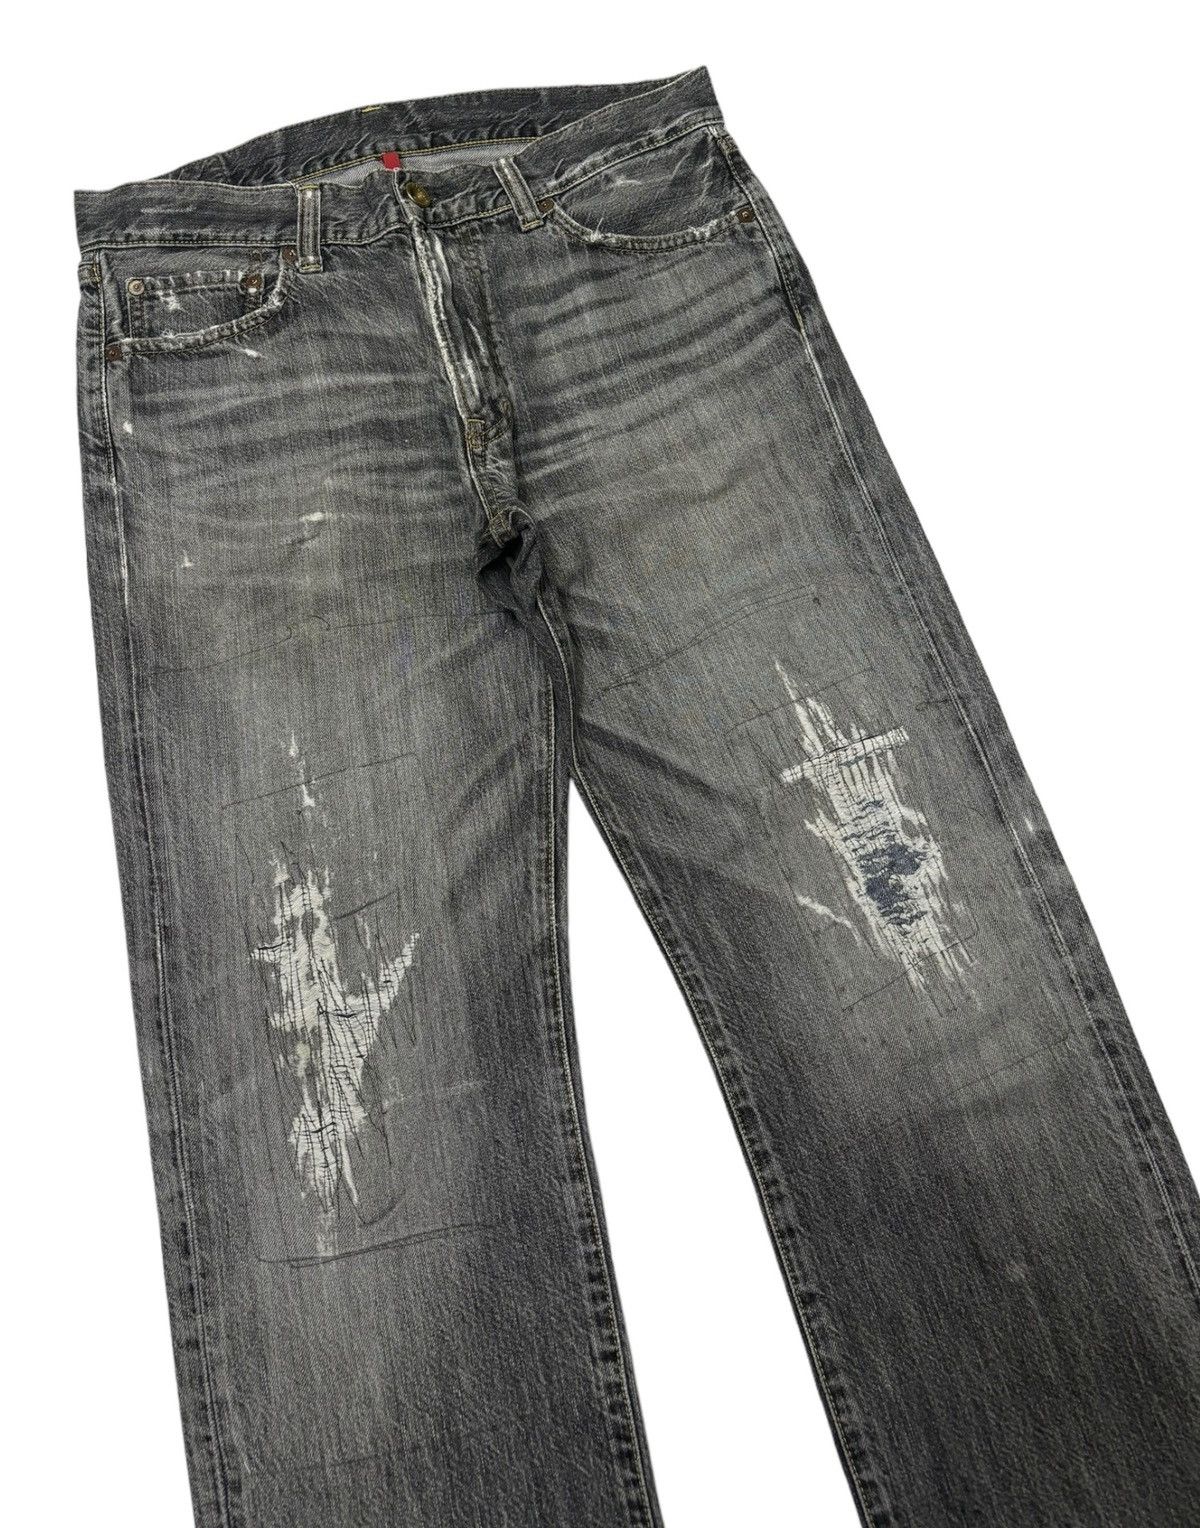 Uniqlo - VINTAGE S002 BLACK FADED DISTRESS BAGGY JEANS - 2